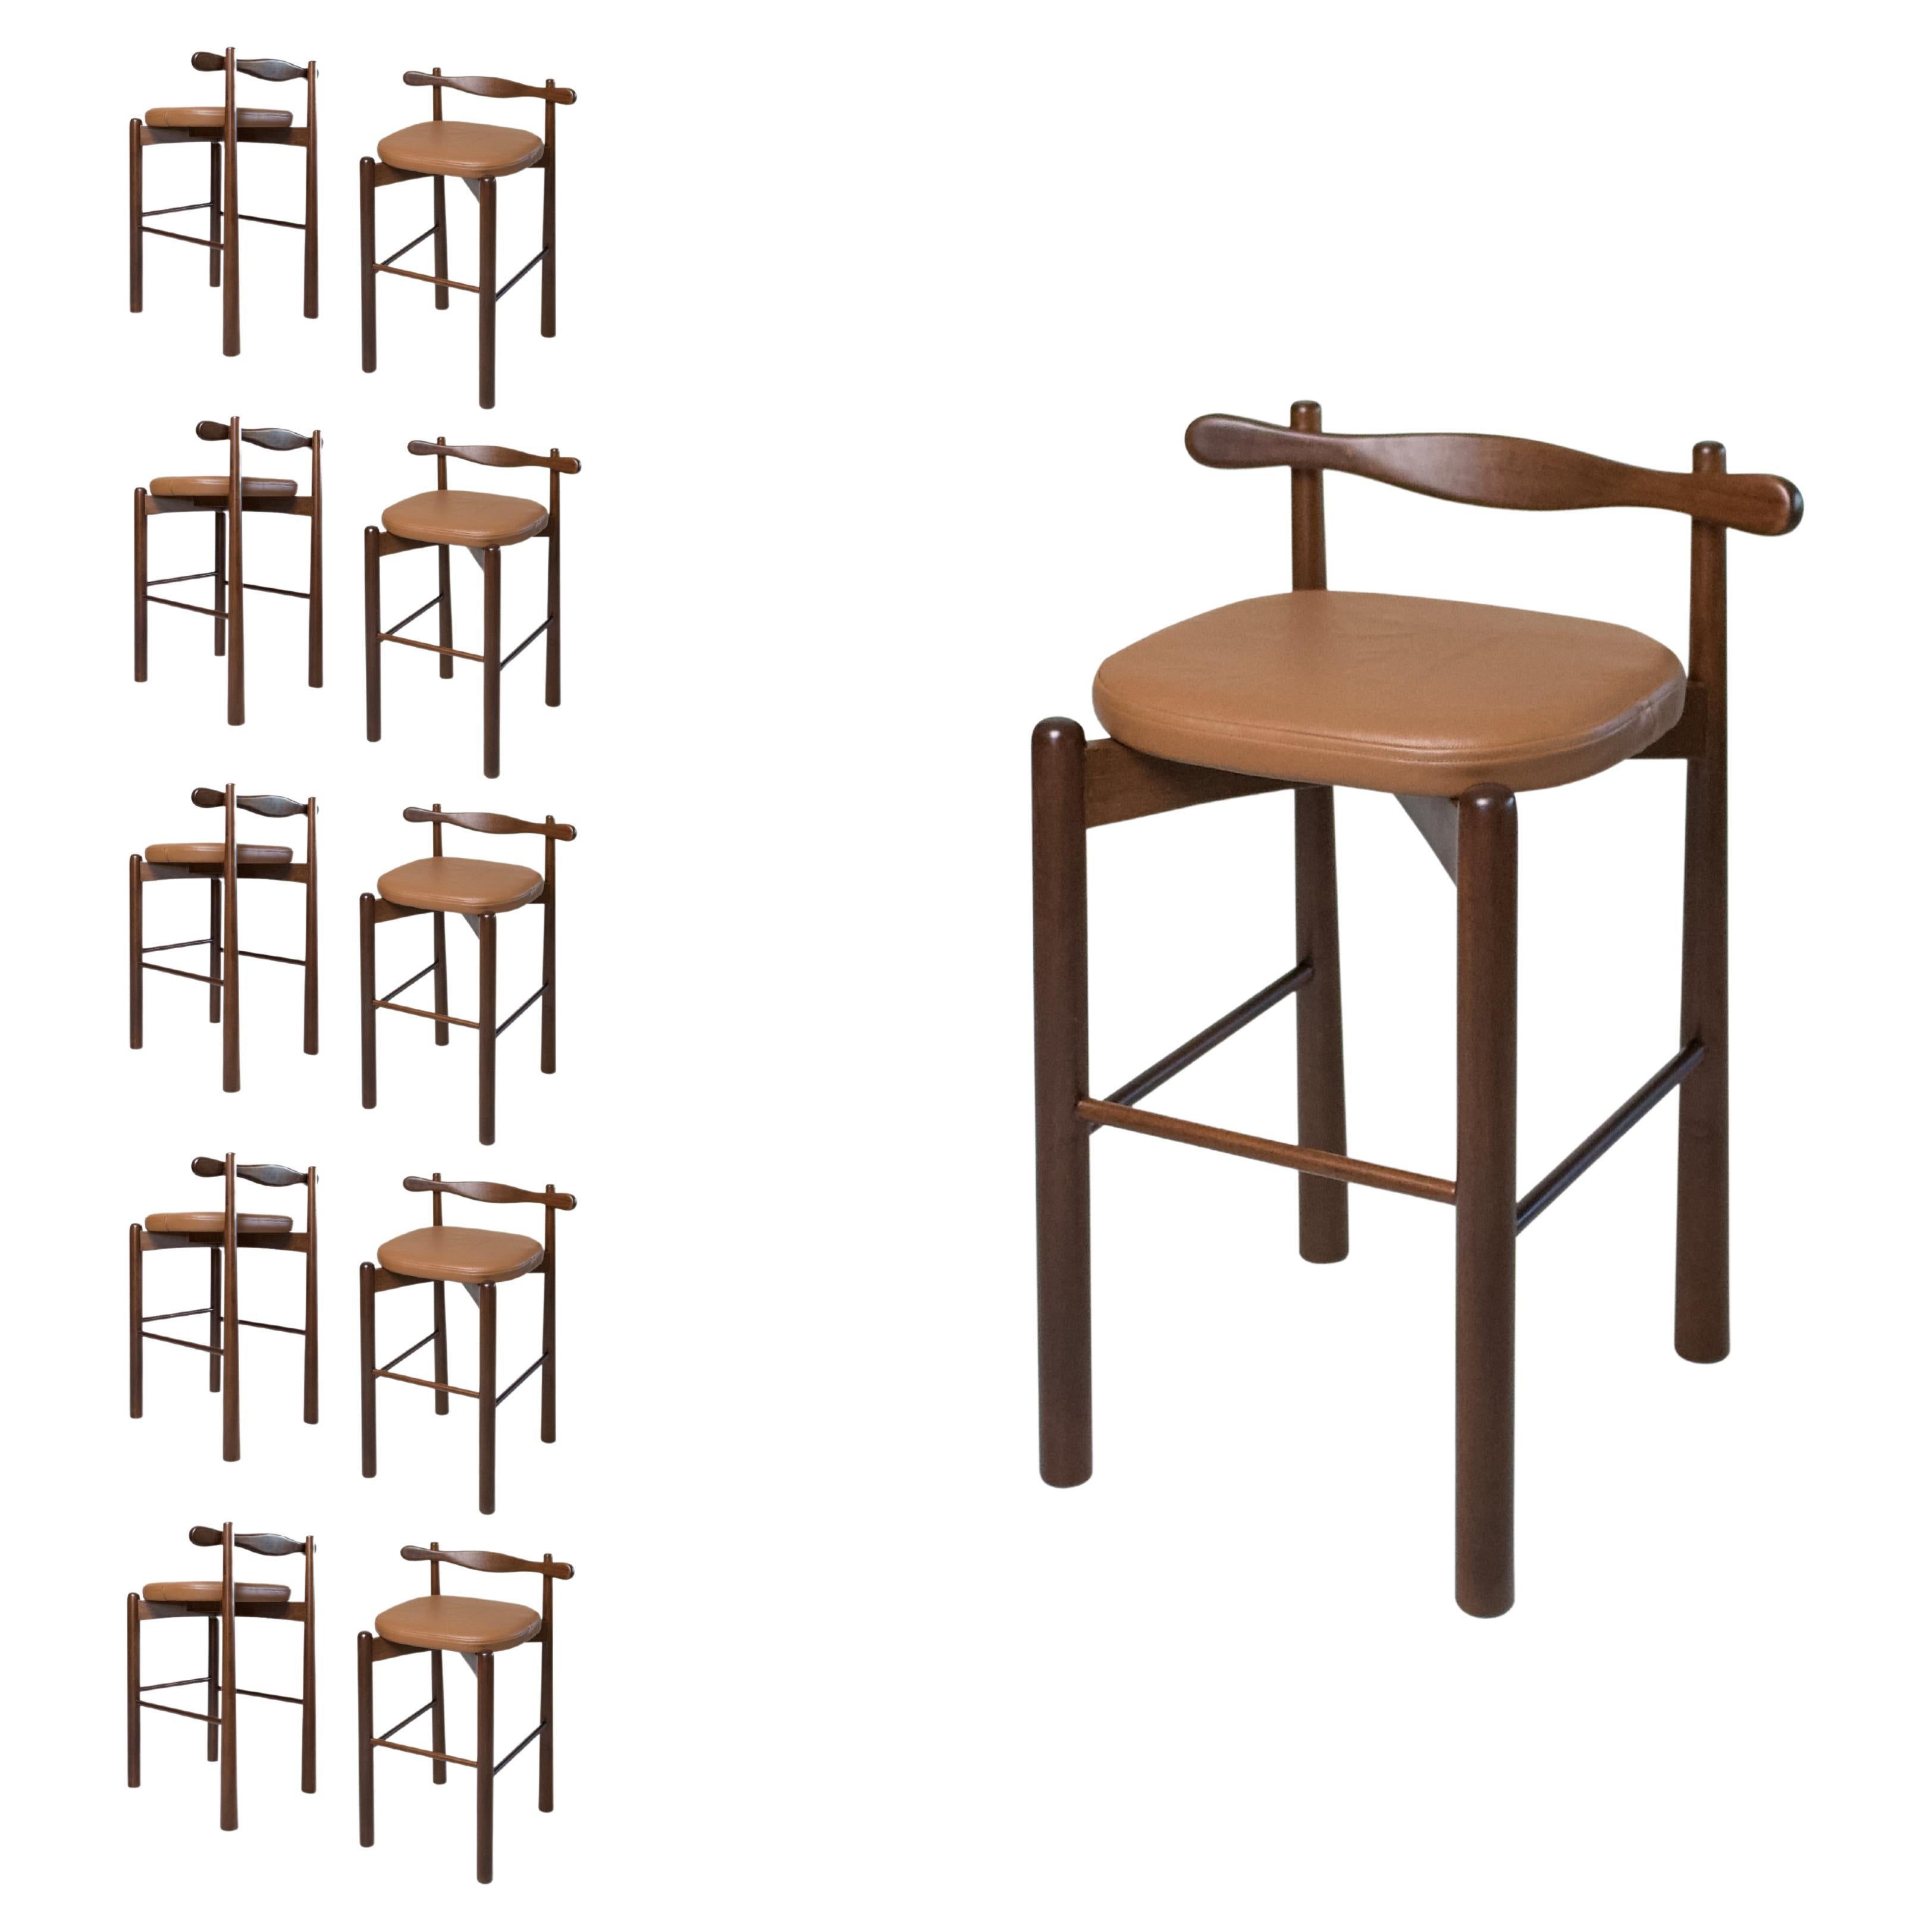 Set of 10 Counter Stools Uçá - Dark Brown Wood (fabric ref : F08) For Sale